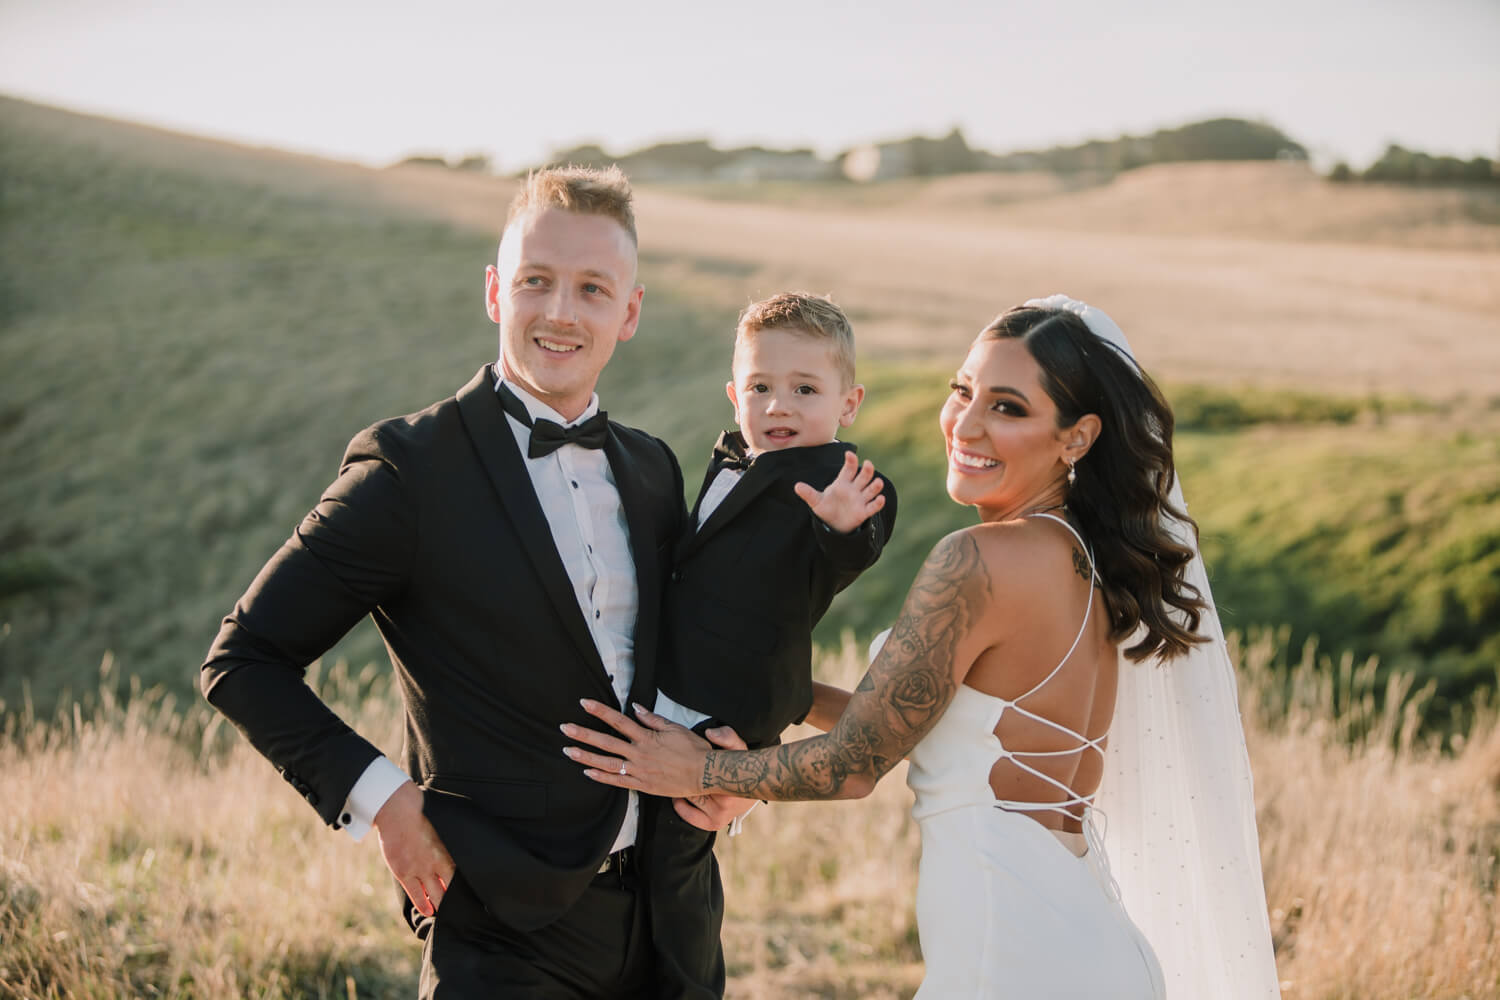 A beautiful shot of the bride and groom with their baby boy, captured by Black Avenue Production